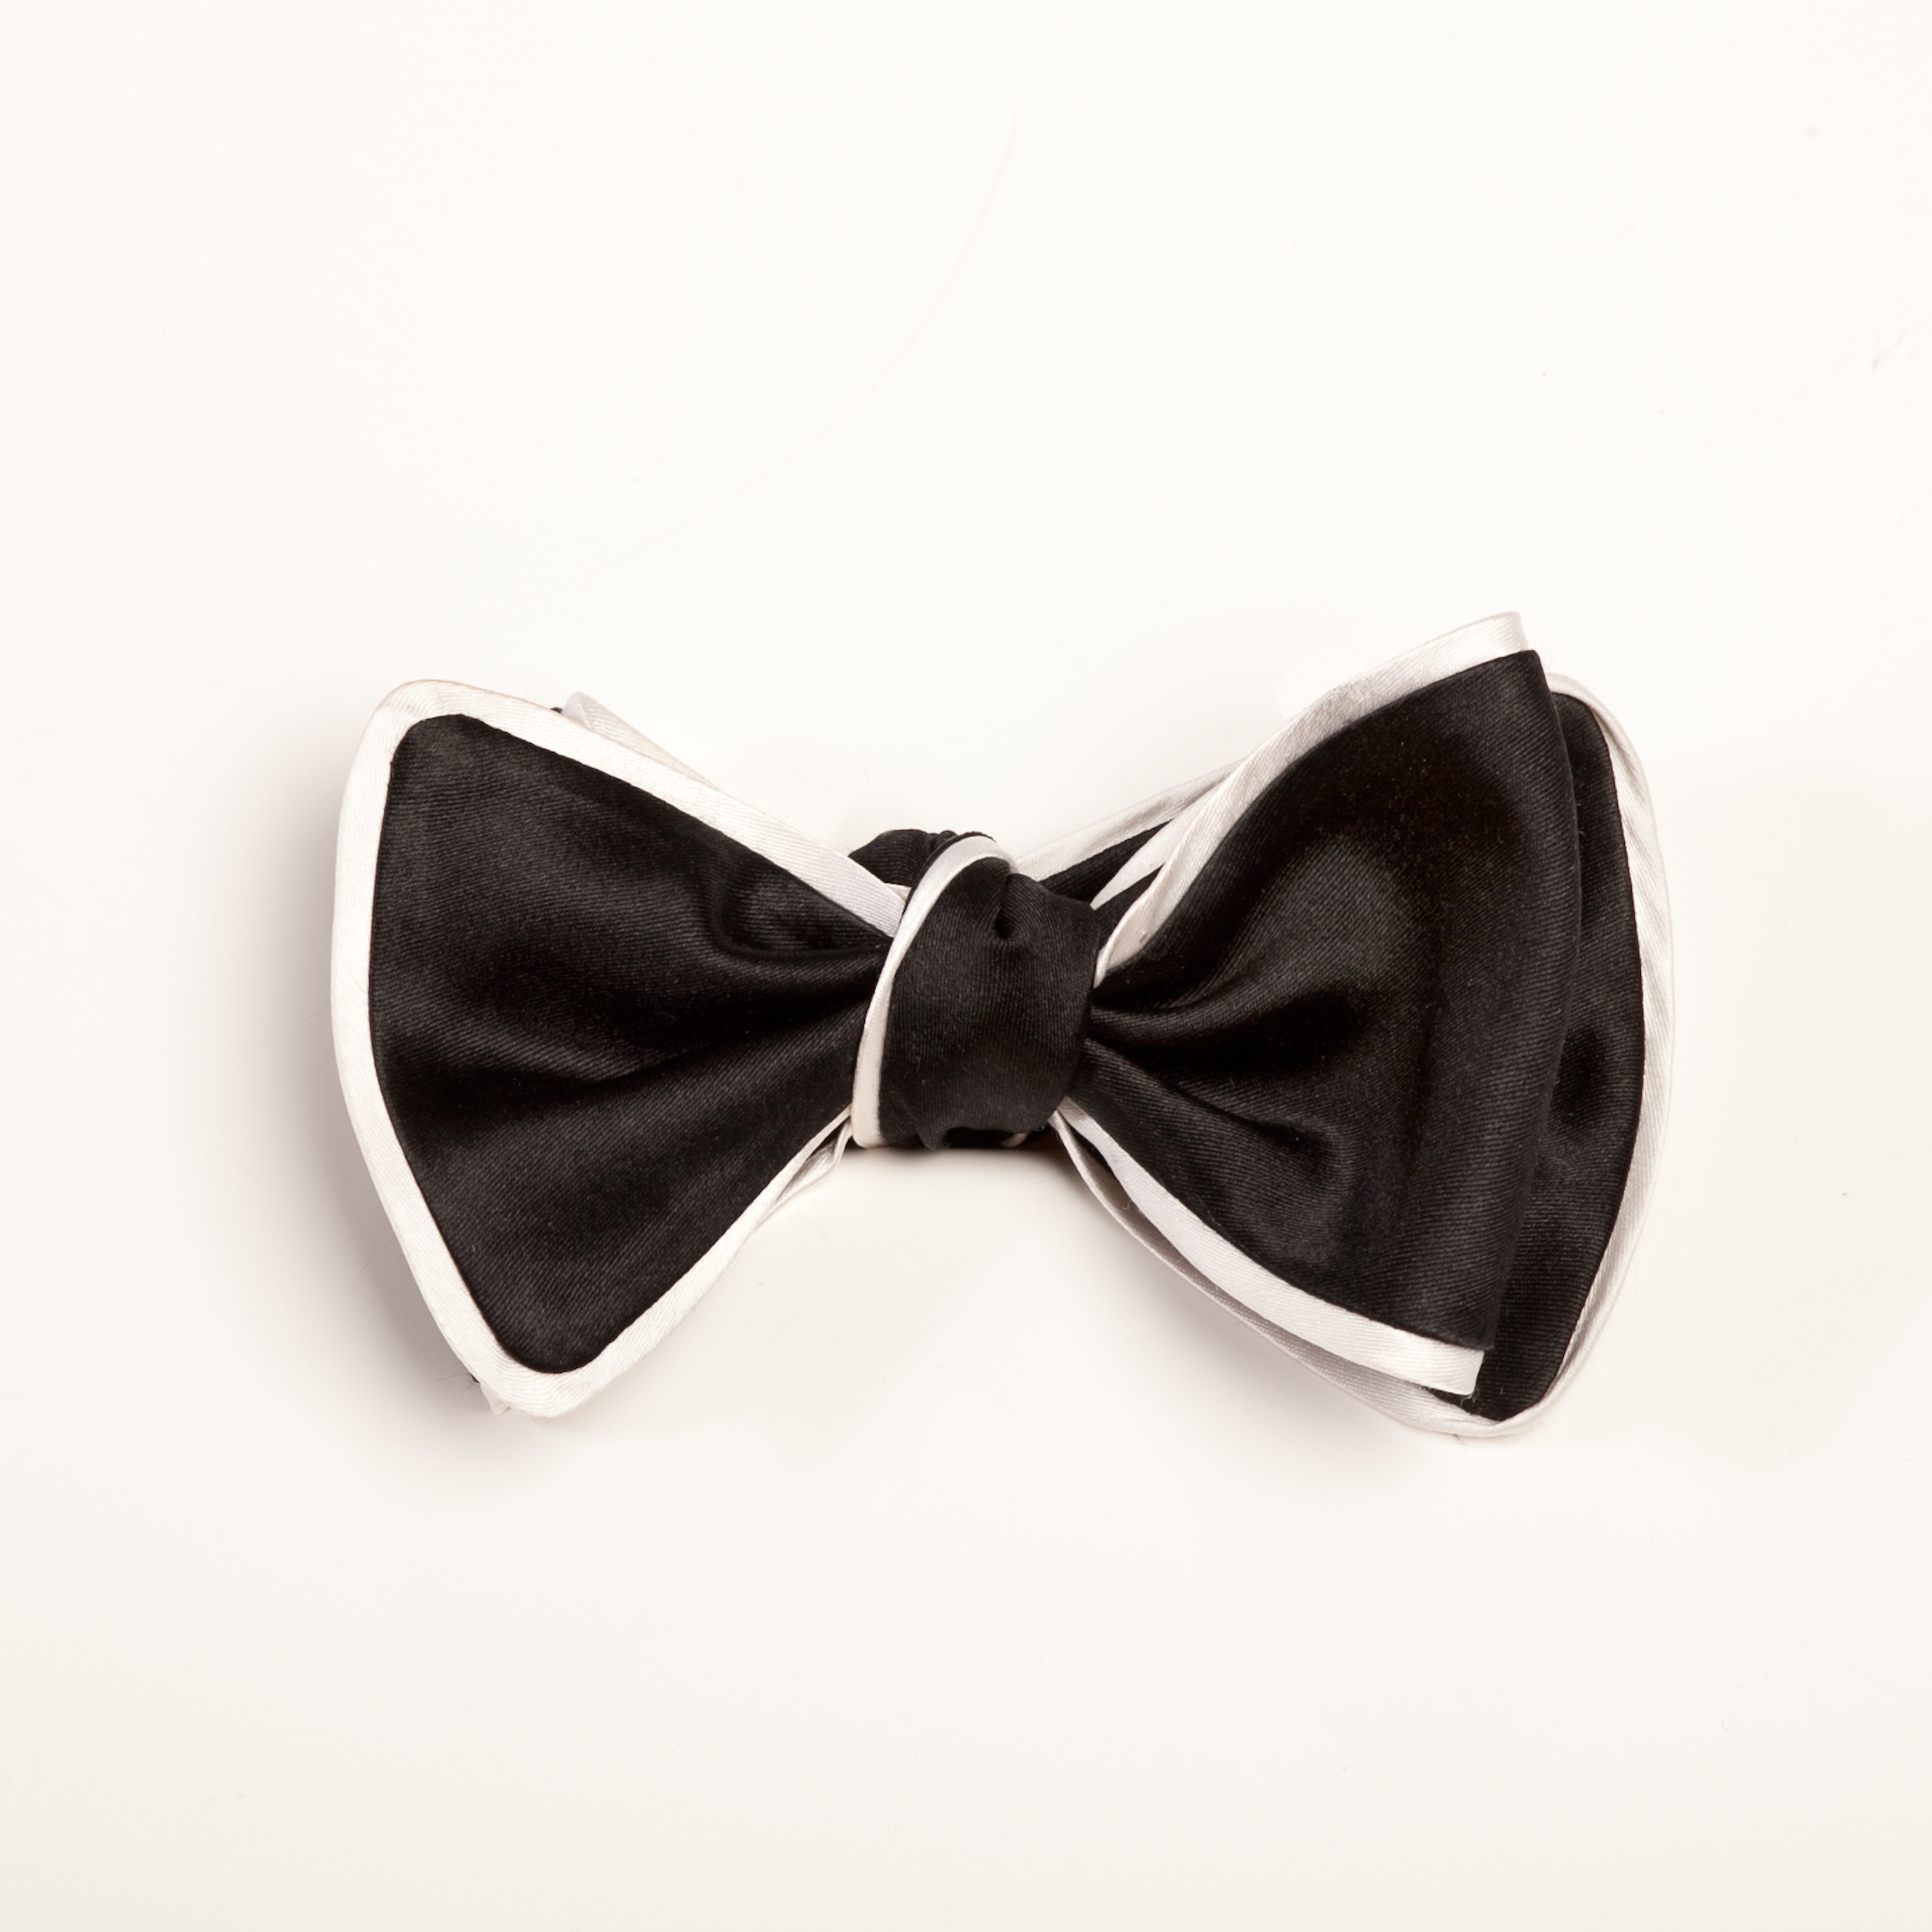 Inspired Knots Satin Black Bow Tie With White Piping